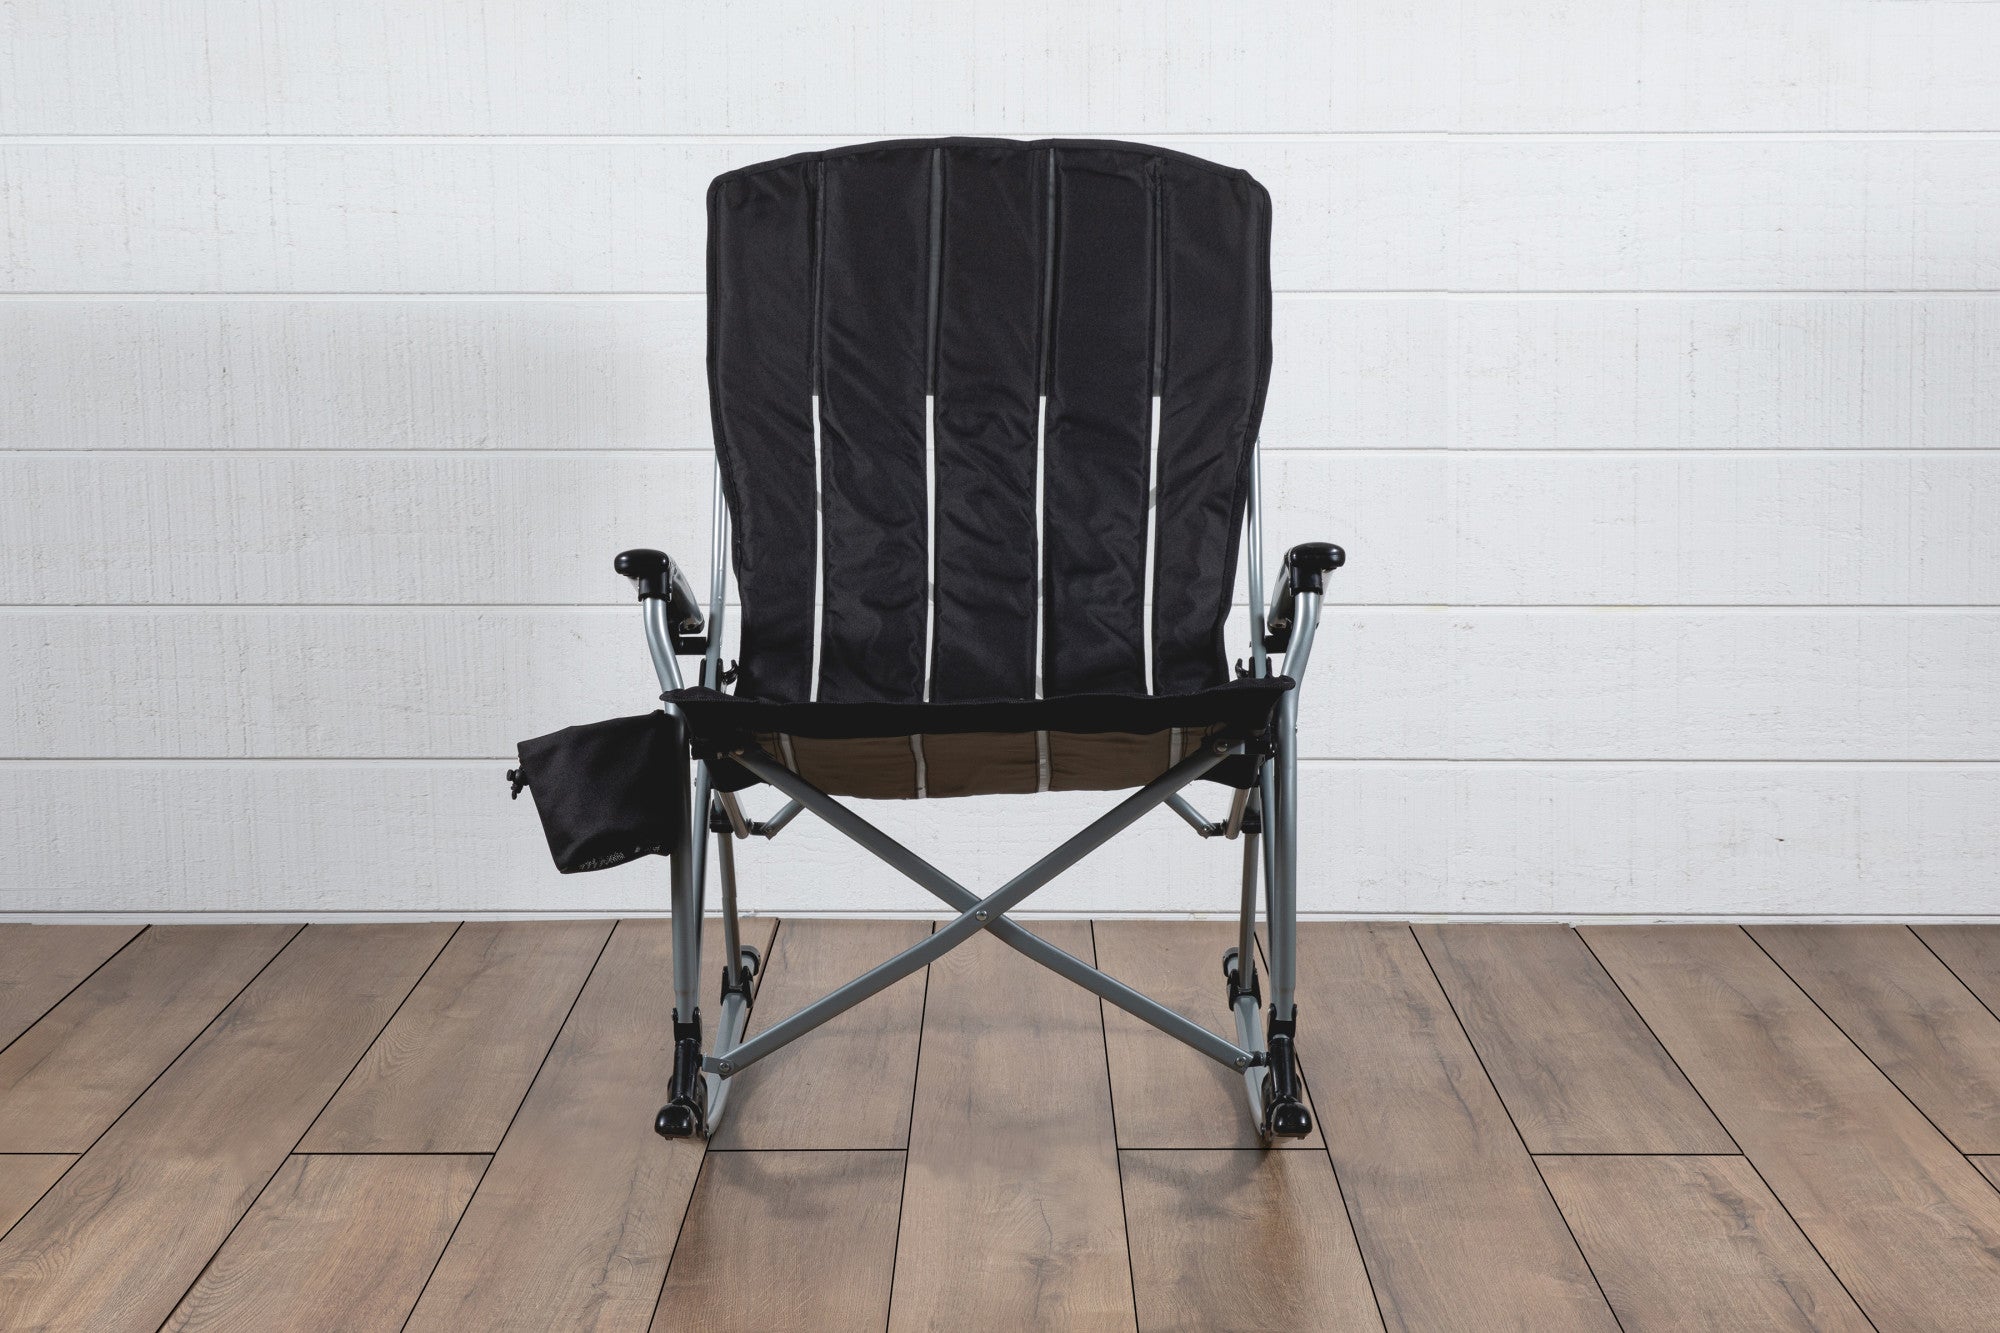 NC State Wolfpack - Outdoor Rocking Camp Chair